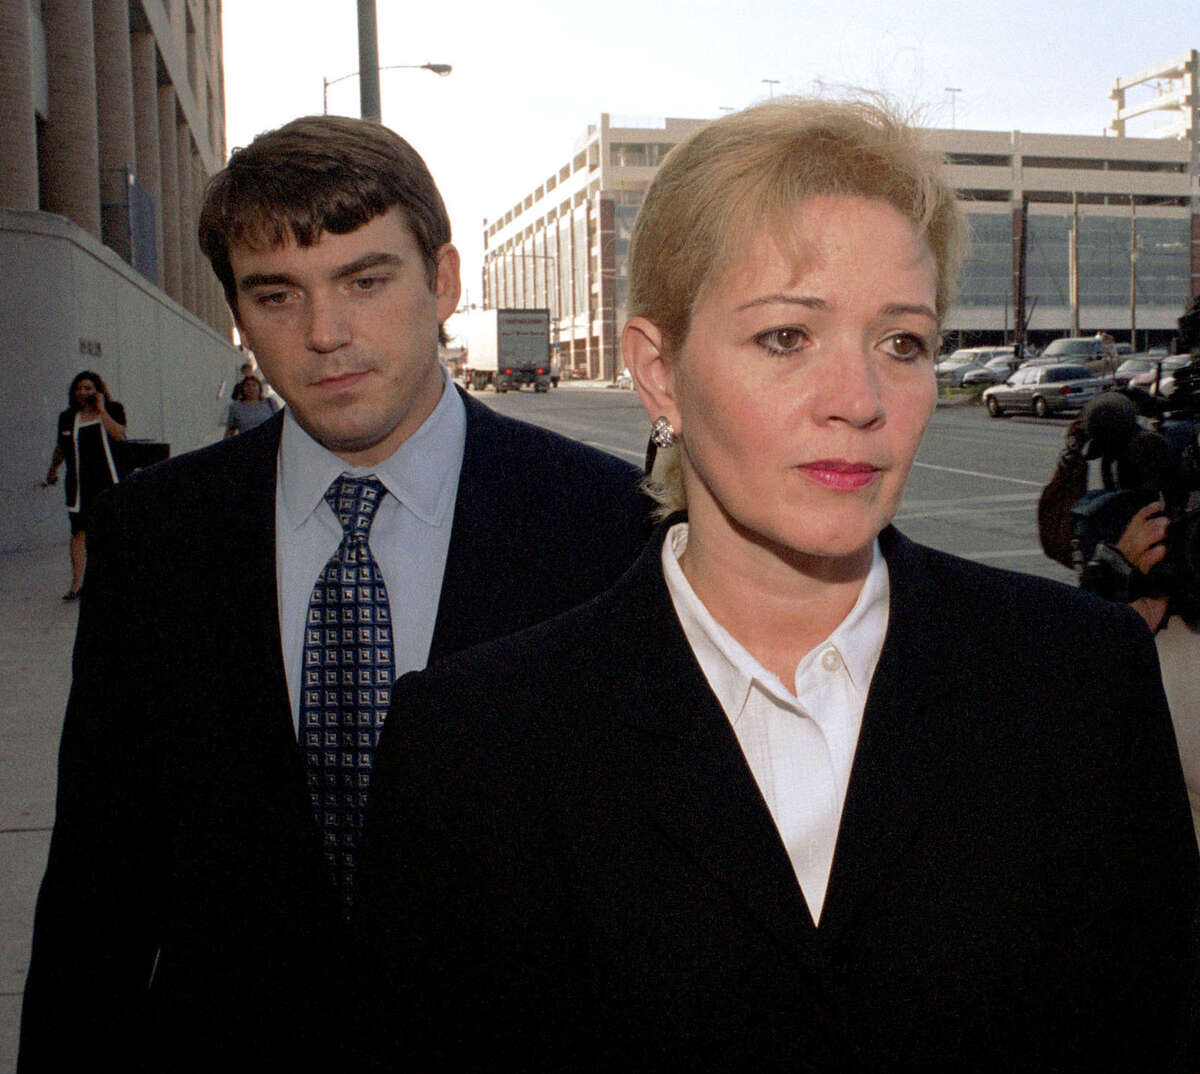 Dr. Clara Harris, right, accompanied by attorney Dee McWilliams, walks to the Harris County Criminal Justice Center on Friday, July 26, 2002. Harris was charged with murder, accused of running her husband over three times then leaving her silver Mercedes-Benz parked on top of him.